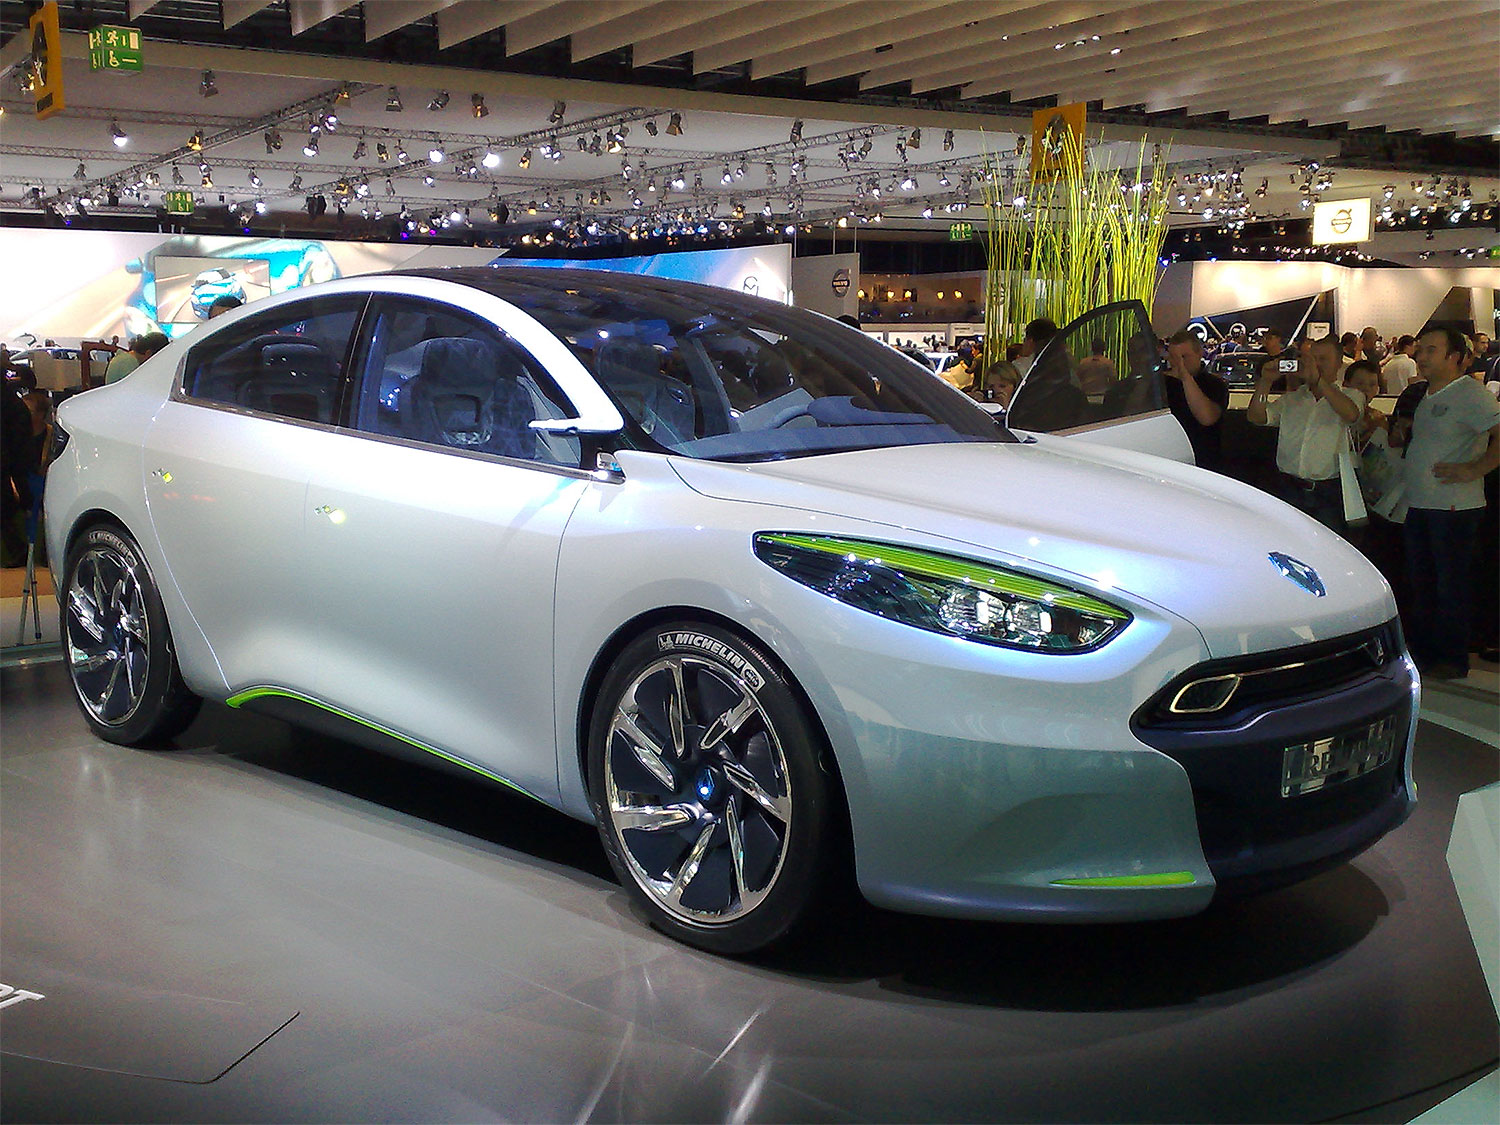 The Renault Fluence Z.E. is an electric version of the Renault Fluence compact sedan, part of the Renault Z.E. program of battery electric vehicles.